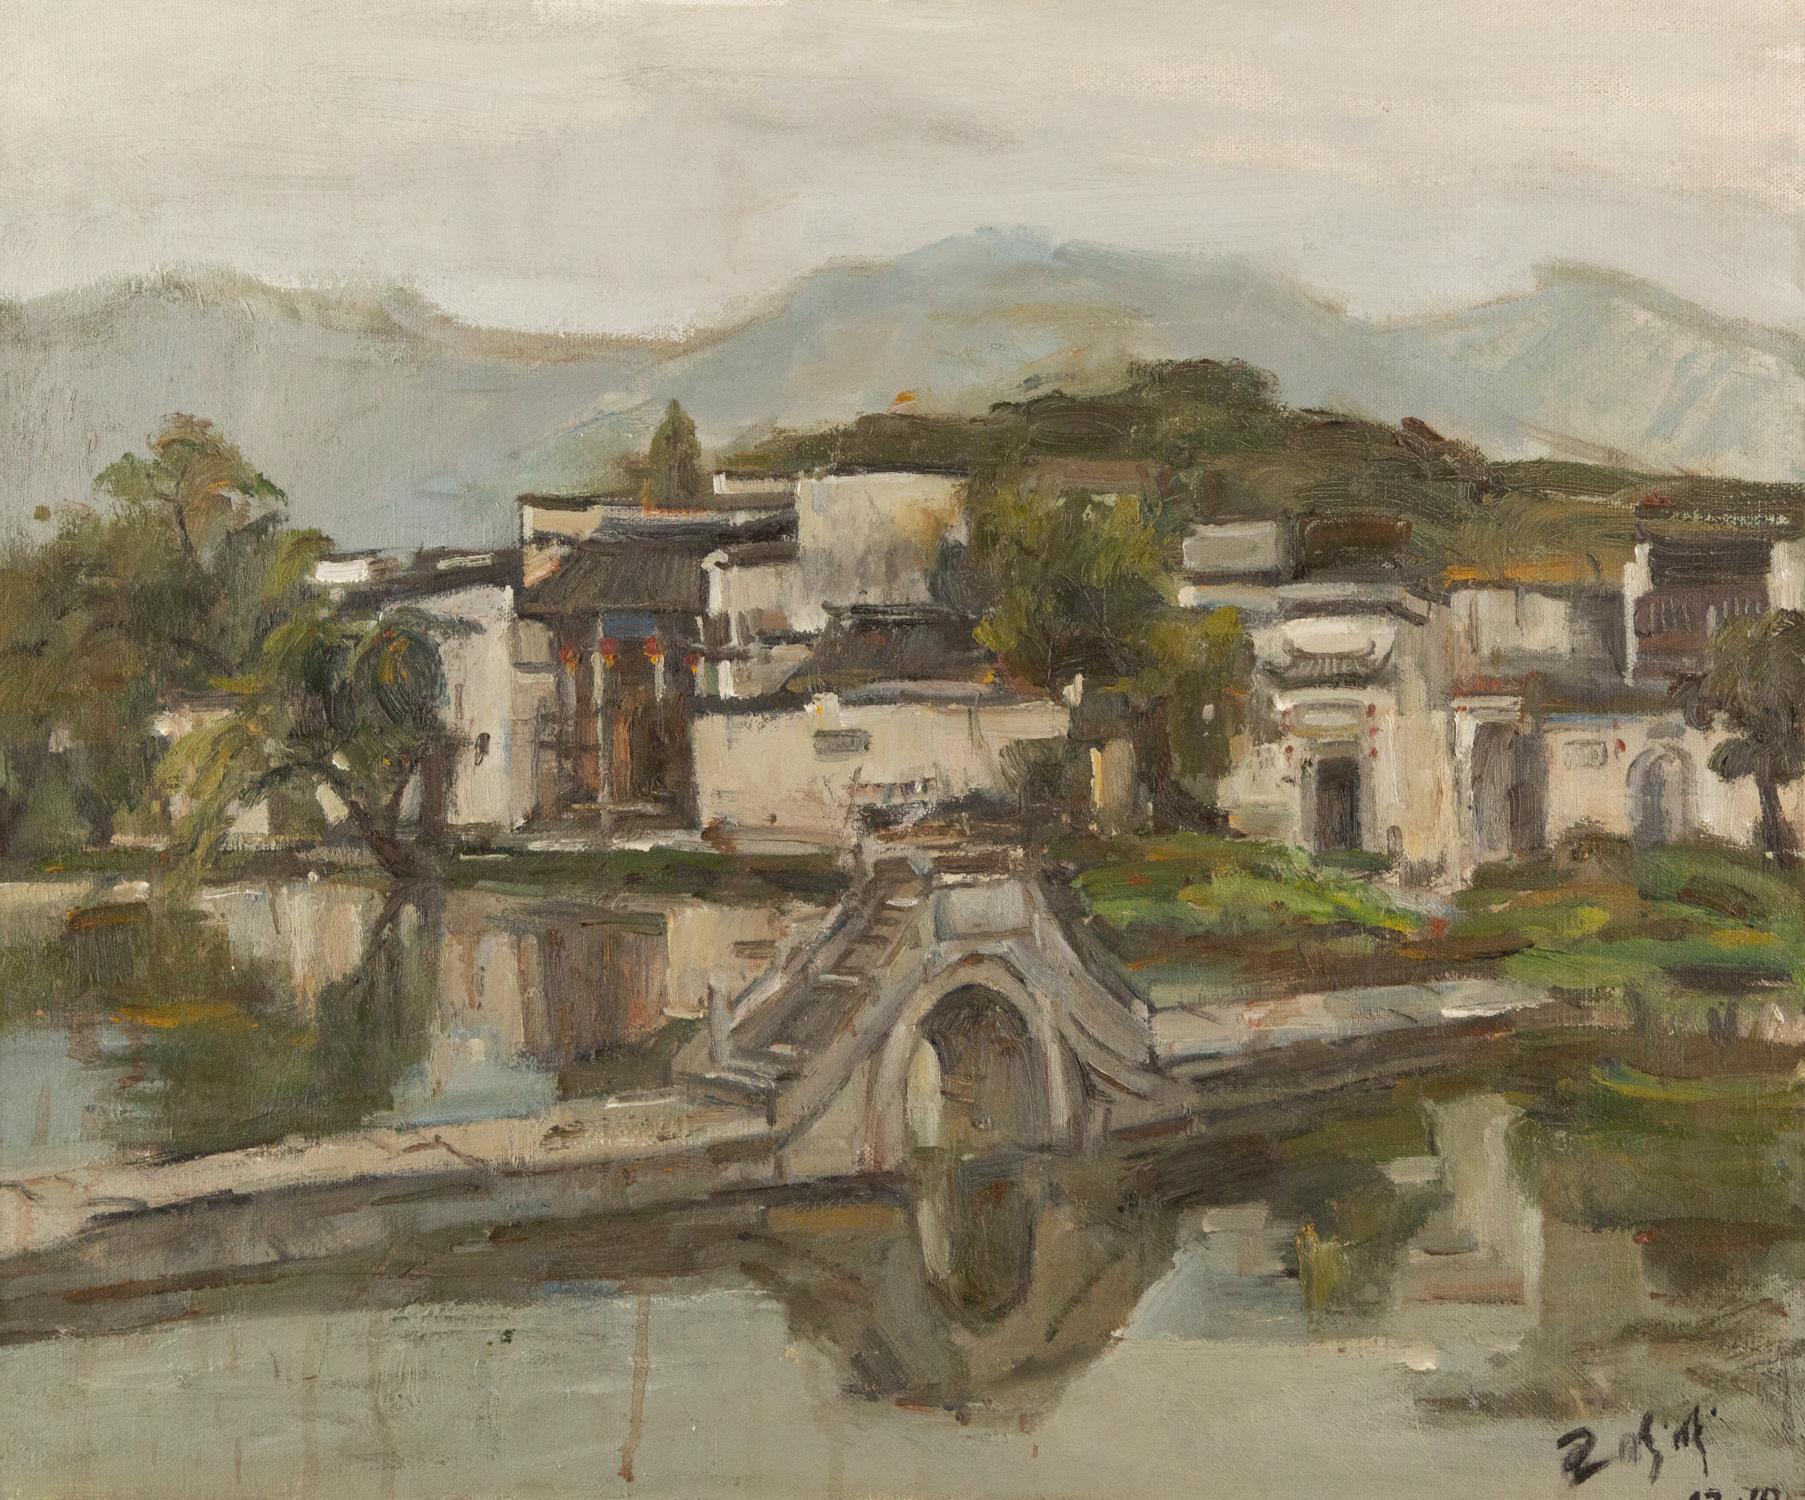 Title: Quaint Town
Medium: Oil on canvas
Size: 19.75 x 23.5 inches
Frame: Framing options available!
Condition: The painting appears to be in excellent condition.
Note: This painting is unstretched
Year: 2000 Circa
Artist: Wang PanPan
Signature: